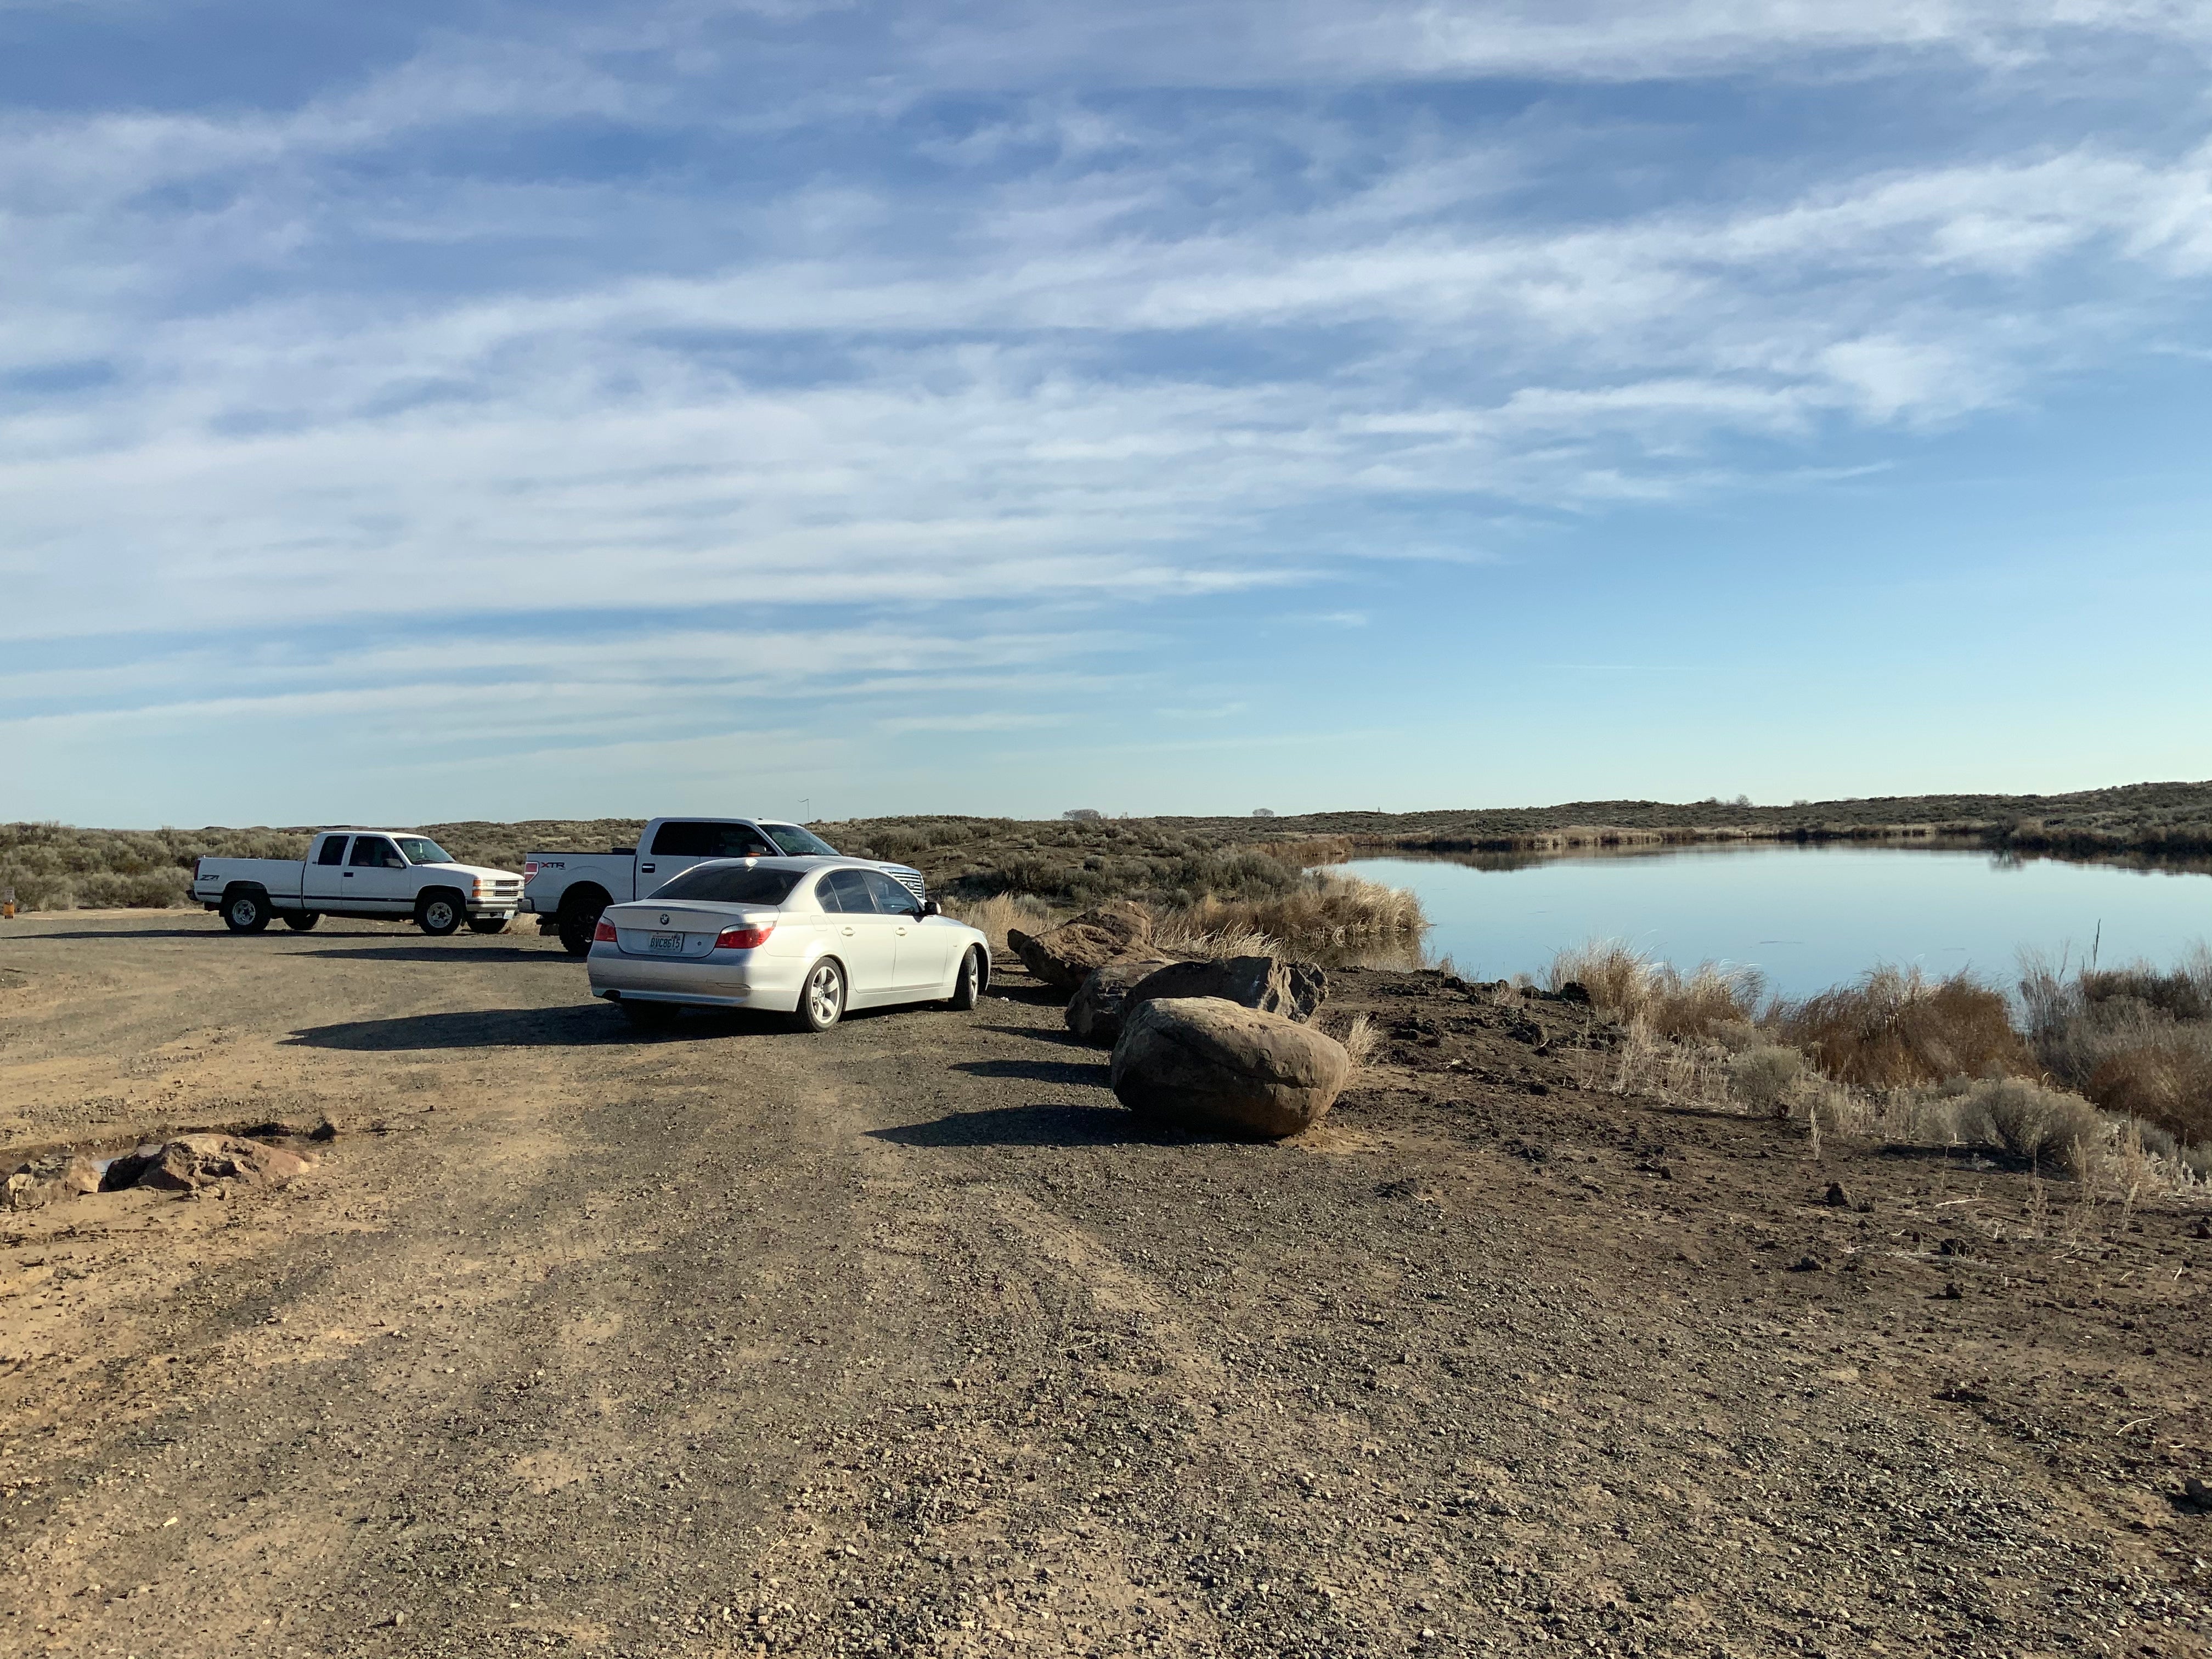 Camper submitted image from Caliche Lake - 2